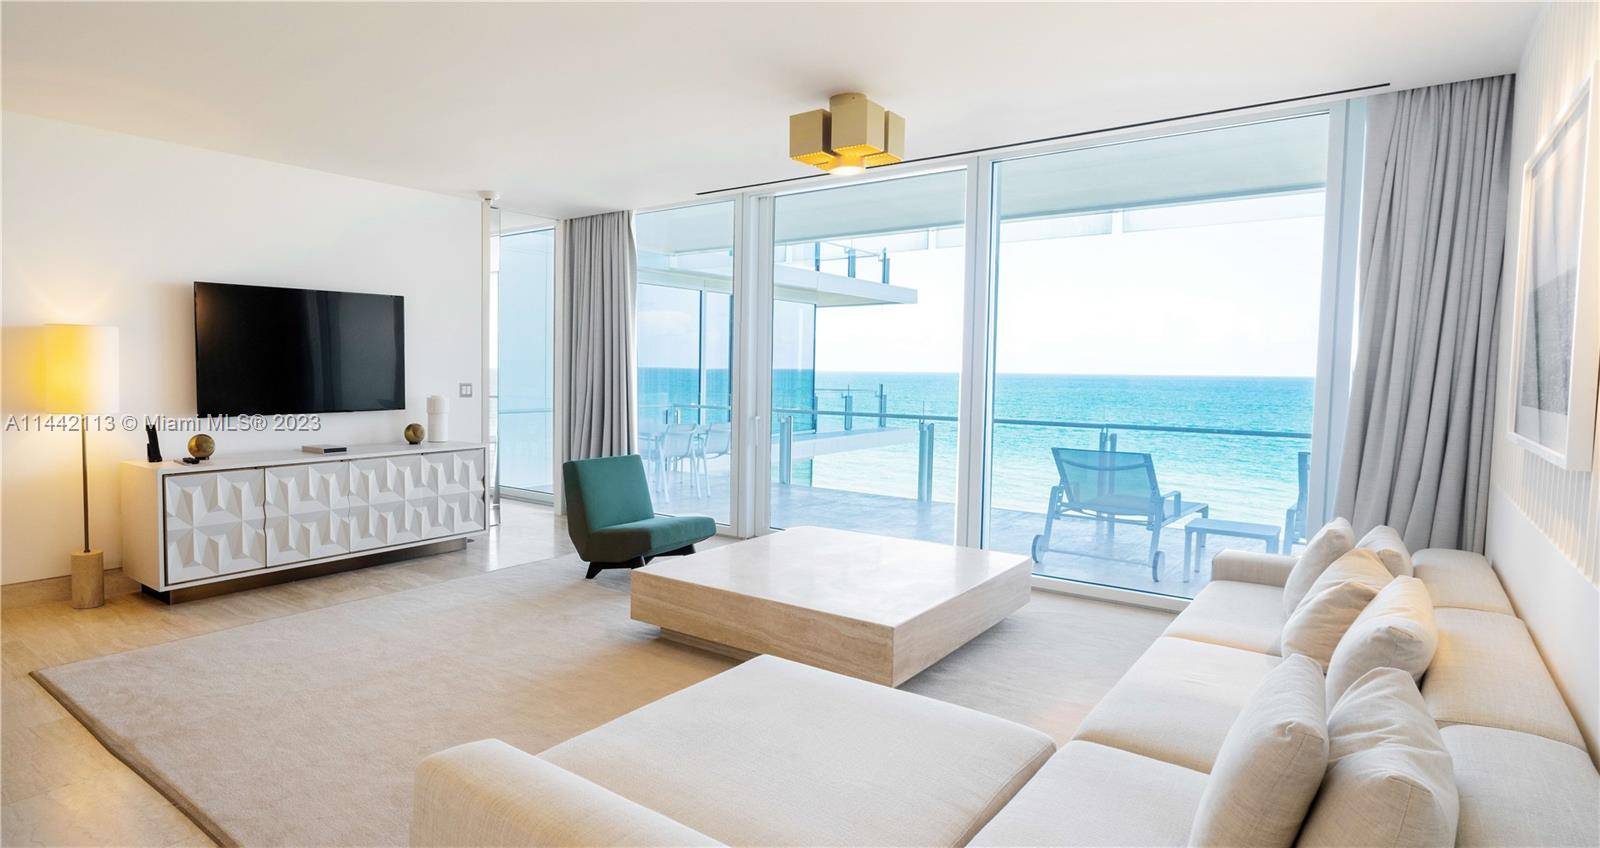 Enjoy FOUR SEASONS HOSPITALITY in this Corner 1 Bed Den, 2 Bath OCEAN FRONT Hotel Residence furnished by Parisian architect, Joseph Dirand.